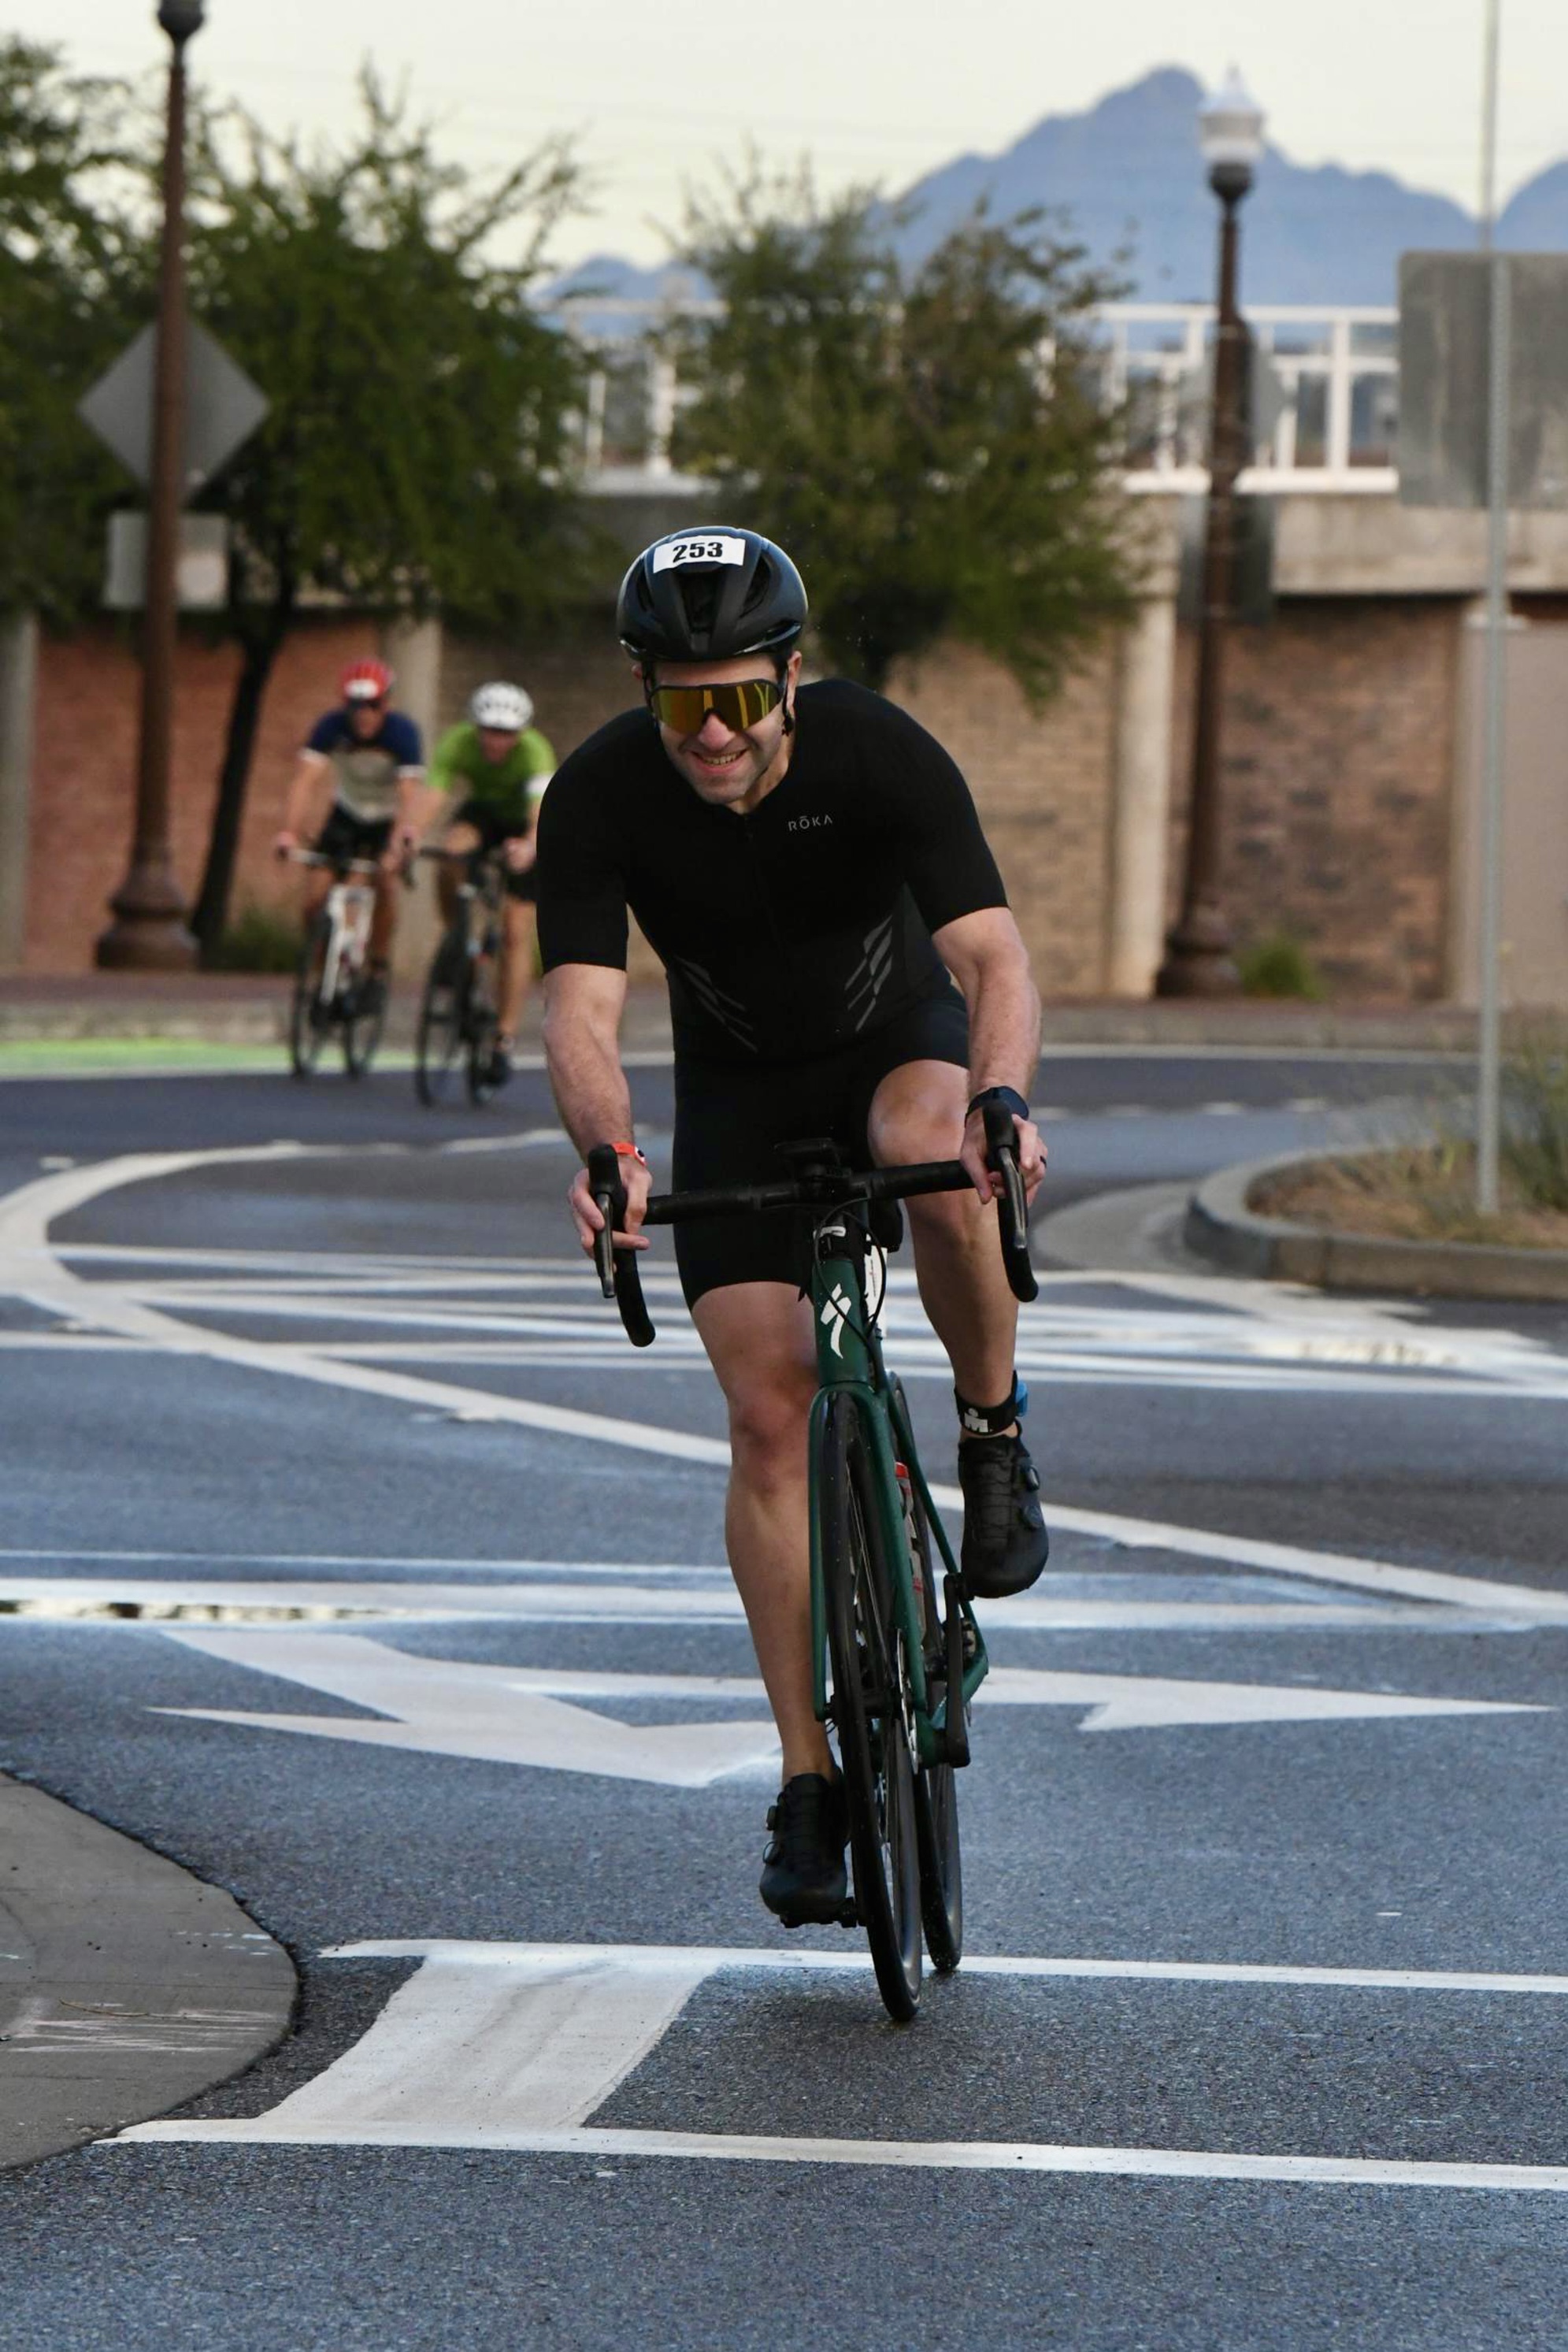 Me, riding a green Specialized Aethos bike around a roundabout, with wet pavement. I'm wearing a black helmet, gold sunglasses, black tri suit, and black shoes. Behind me, two other riders.